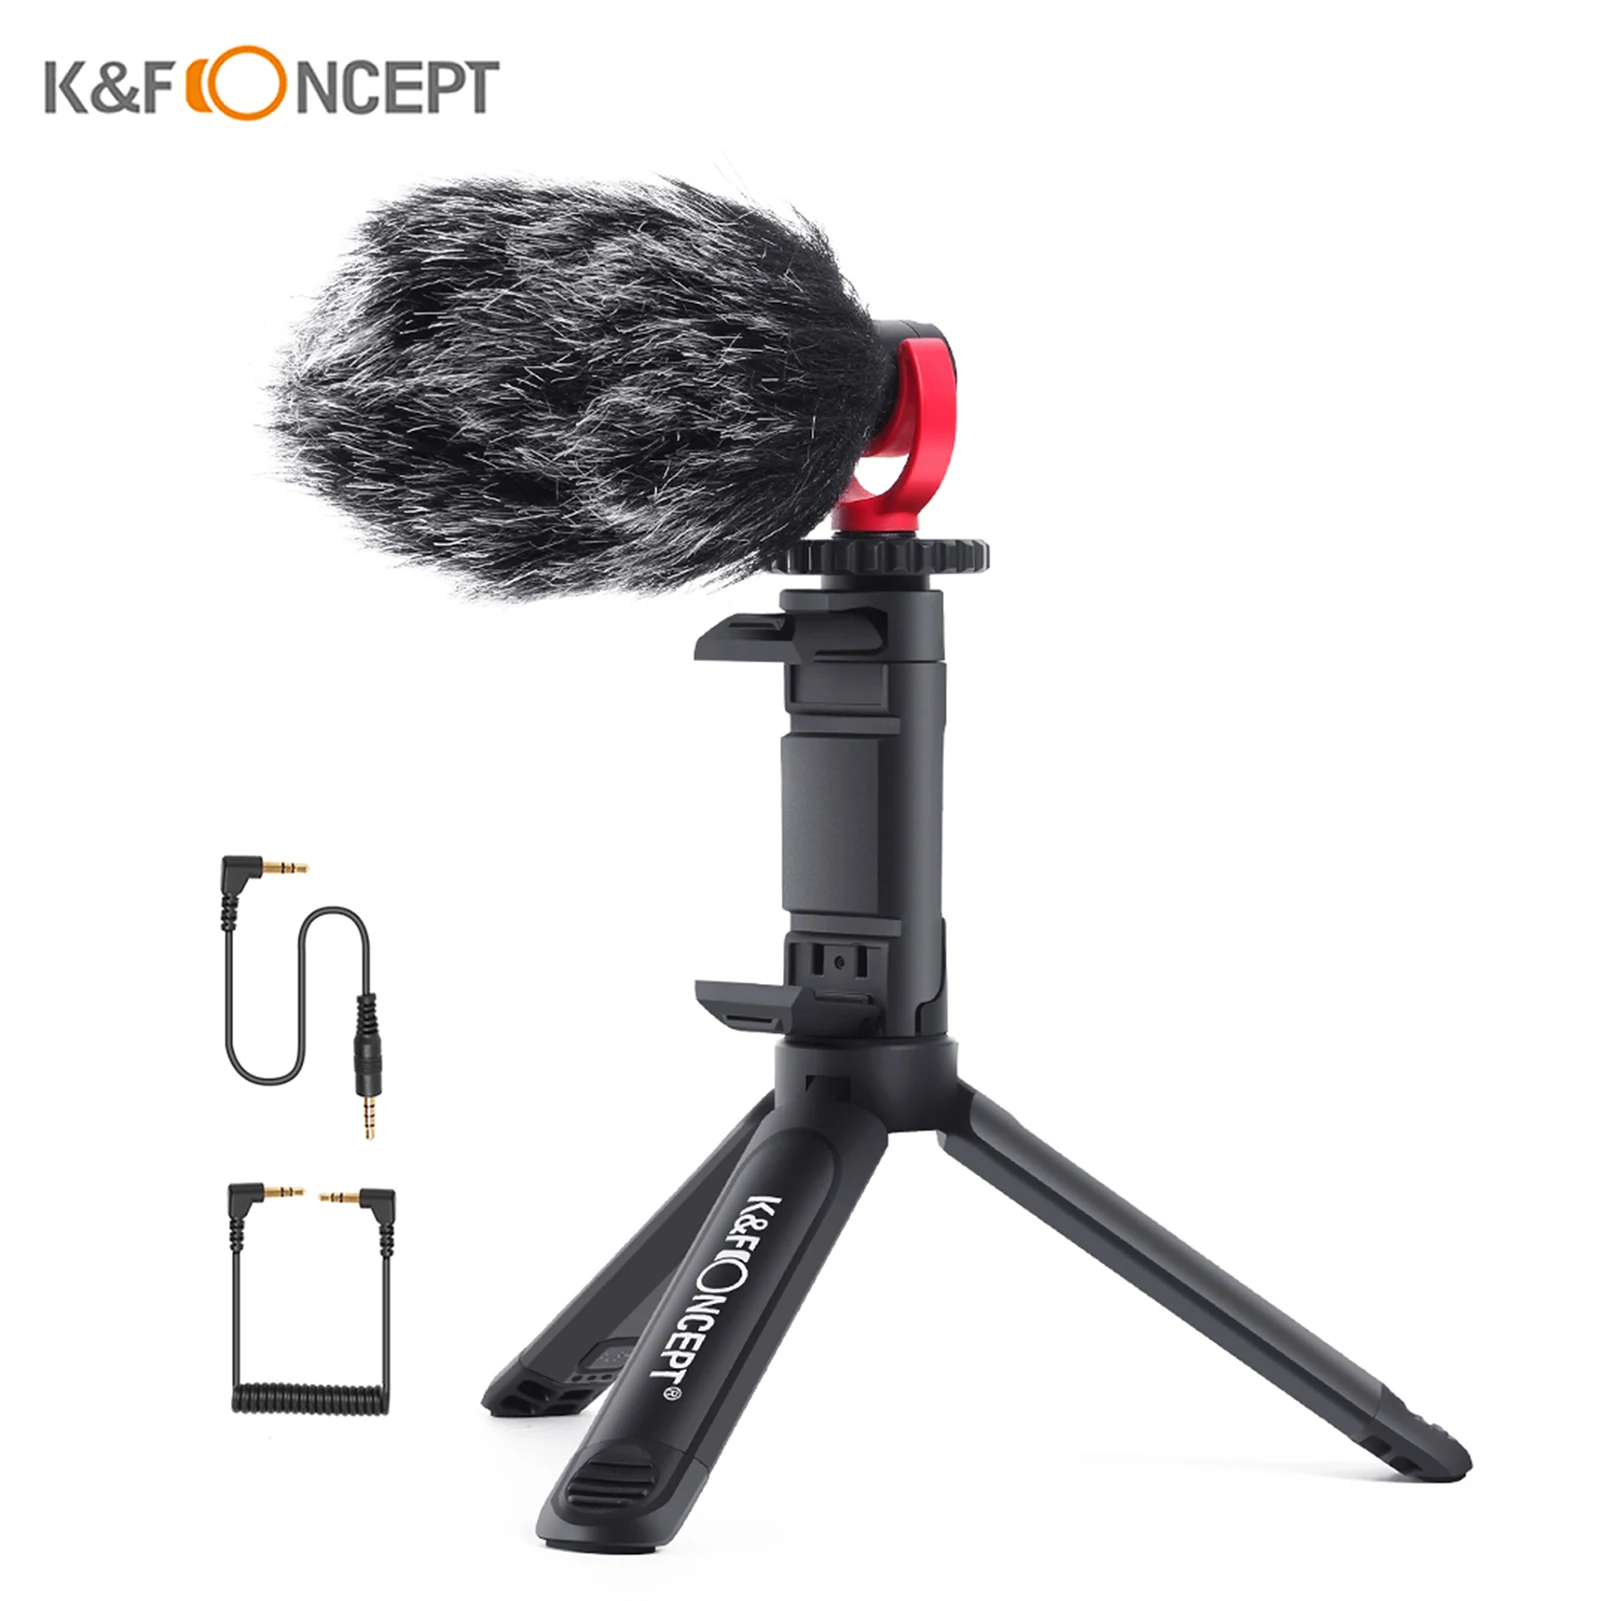 

K&F CONCEPT Video Vlog Kit with Cardioid Microphone Phone Holder Tripod Shock Mount 3.5mm TRS TRRS Audio for Smartphone Camera